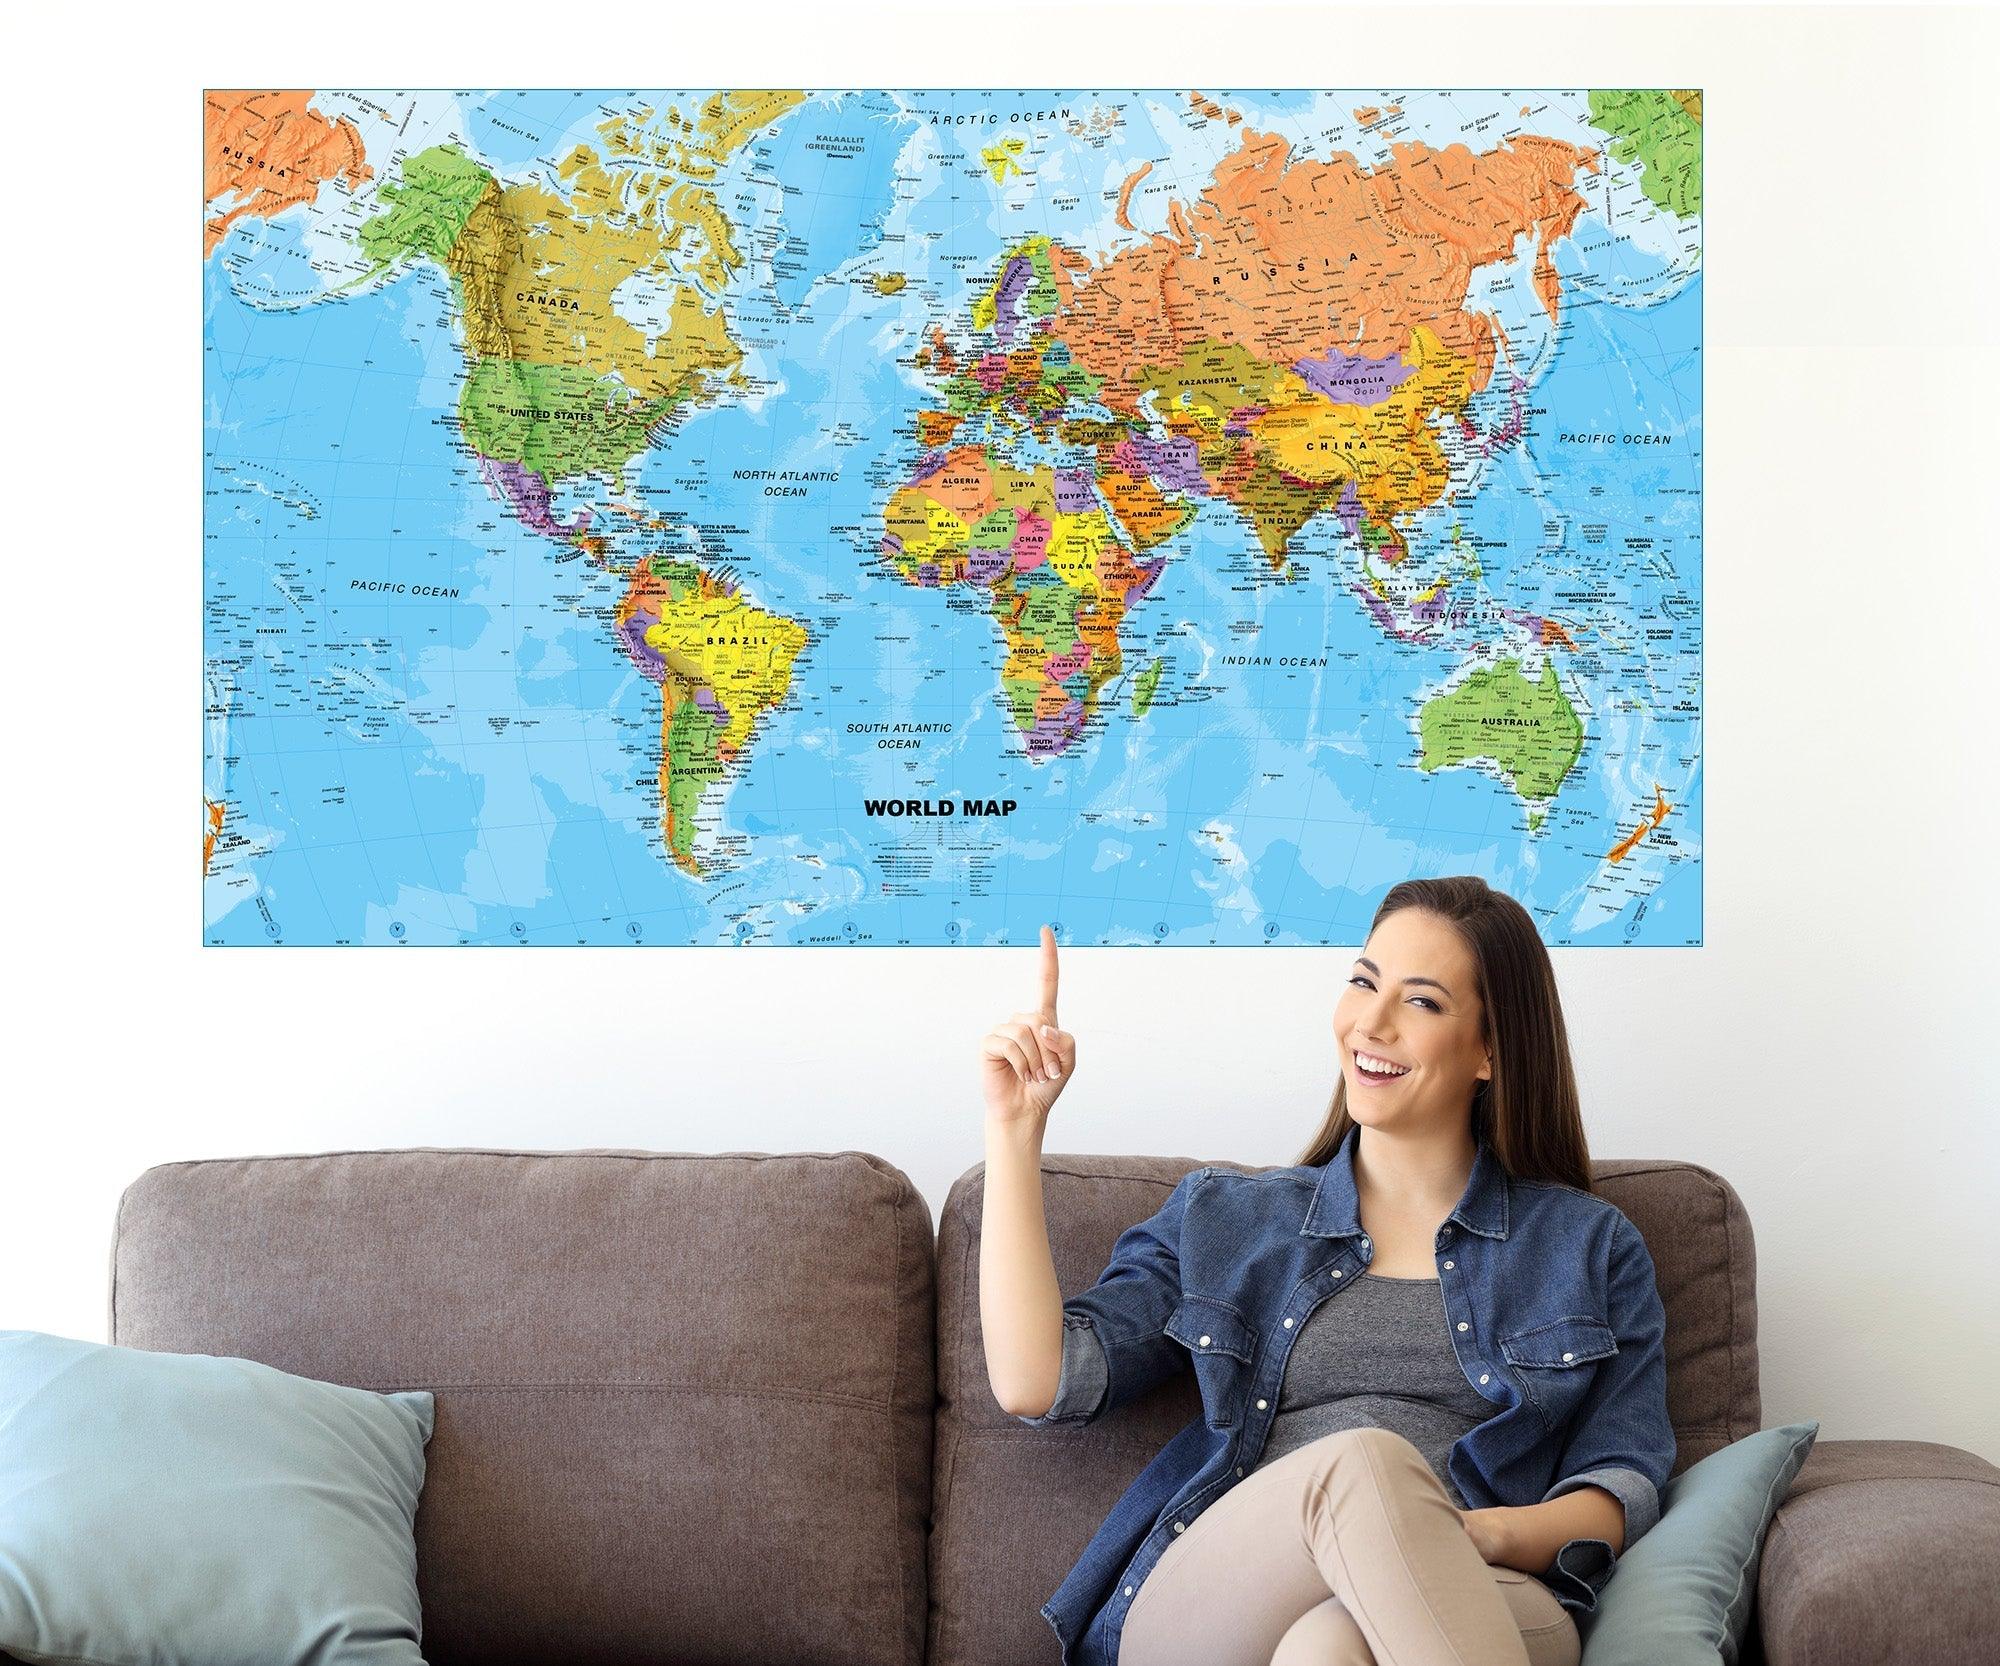 CoolWalls.ca diecut World Map Wall Decal Sticker Wallpaper, PEEL-N-STICK, removable anytime. Great for a classroom